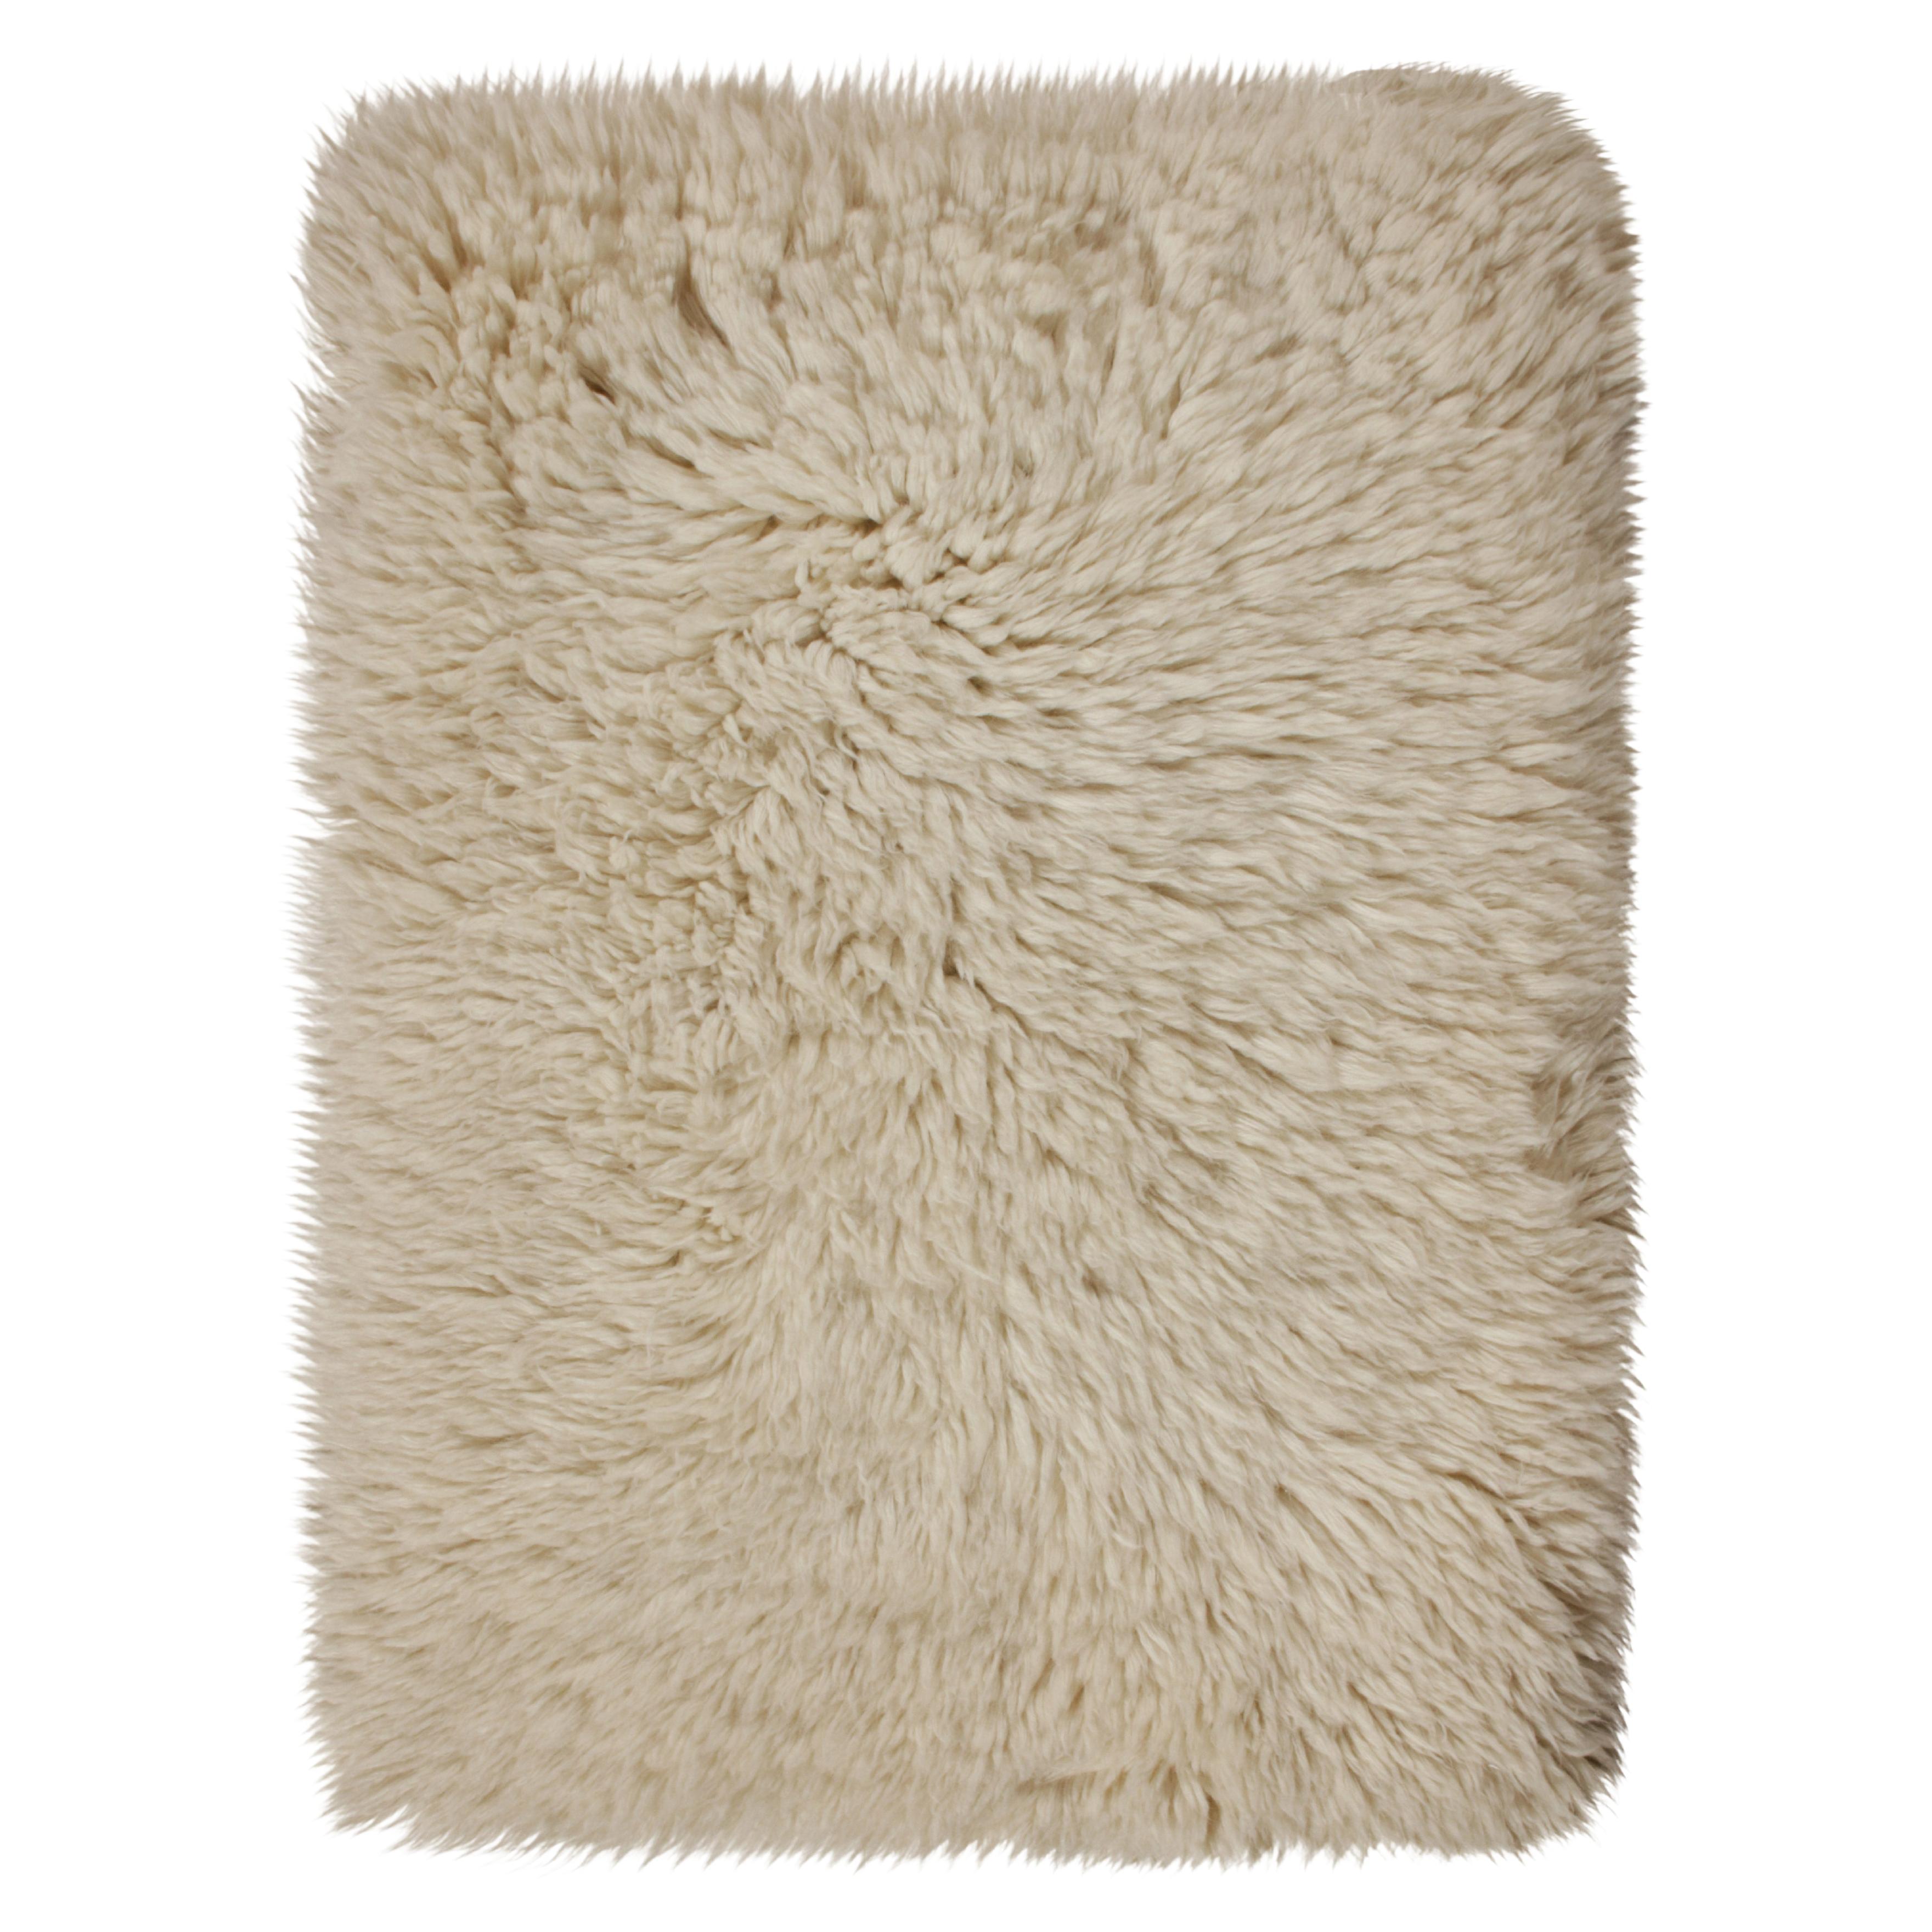 Rug & Kilim’s Moroccan Style Shag Rug in Solid Beige-White, High Pile For Sale